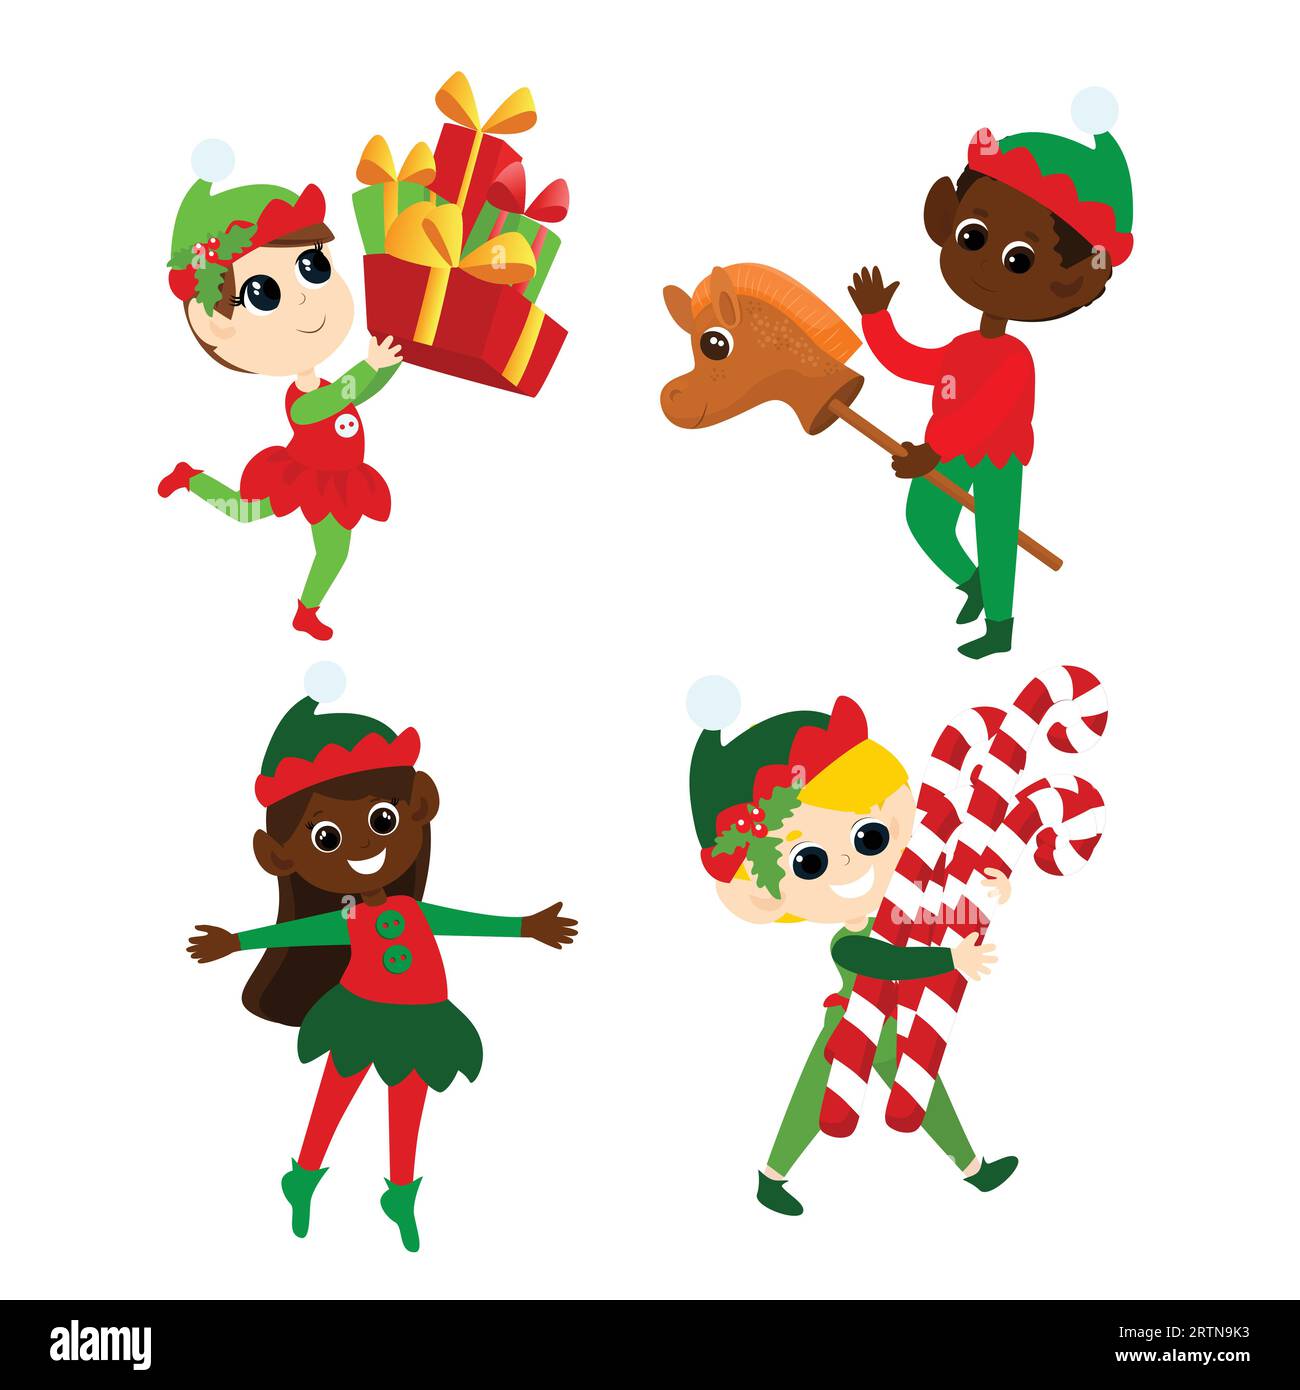 Set Christmas elves. Multicultural boys and girls in traditional elf costumes. They dance, smile, bring gifts, carry lollipops. Stock Vector